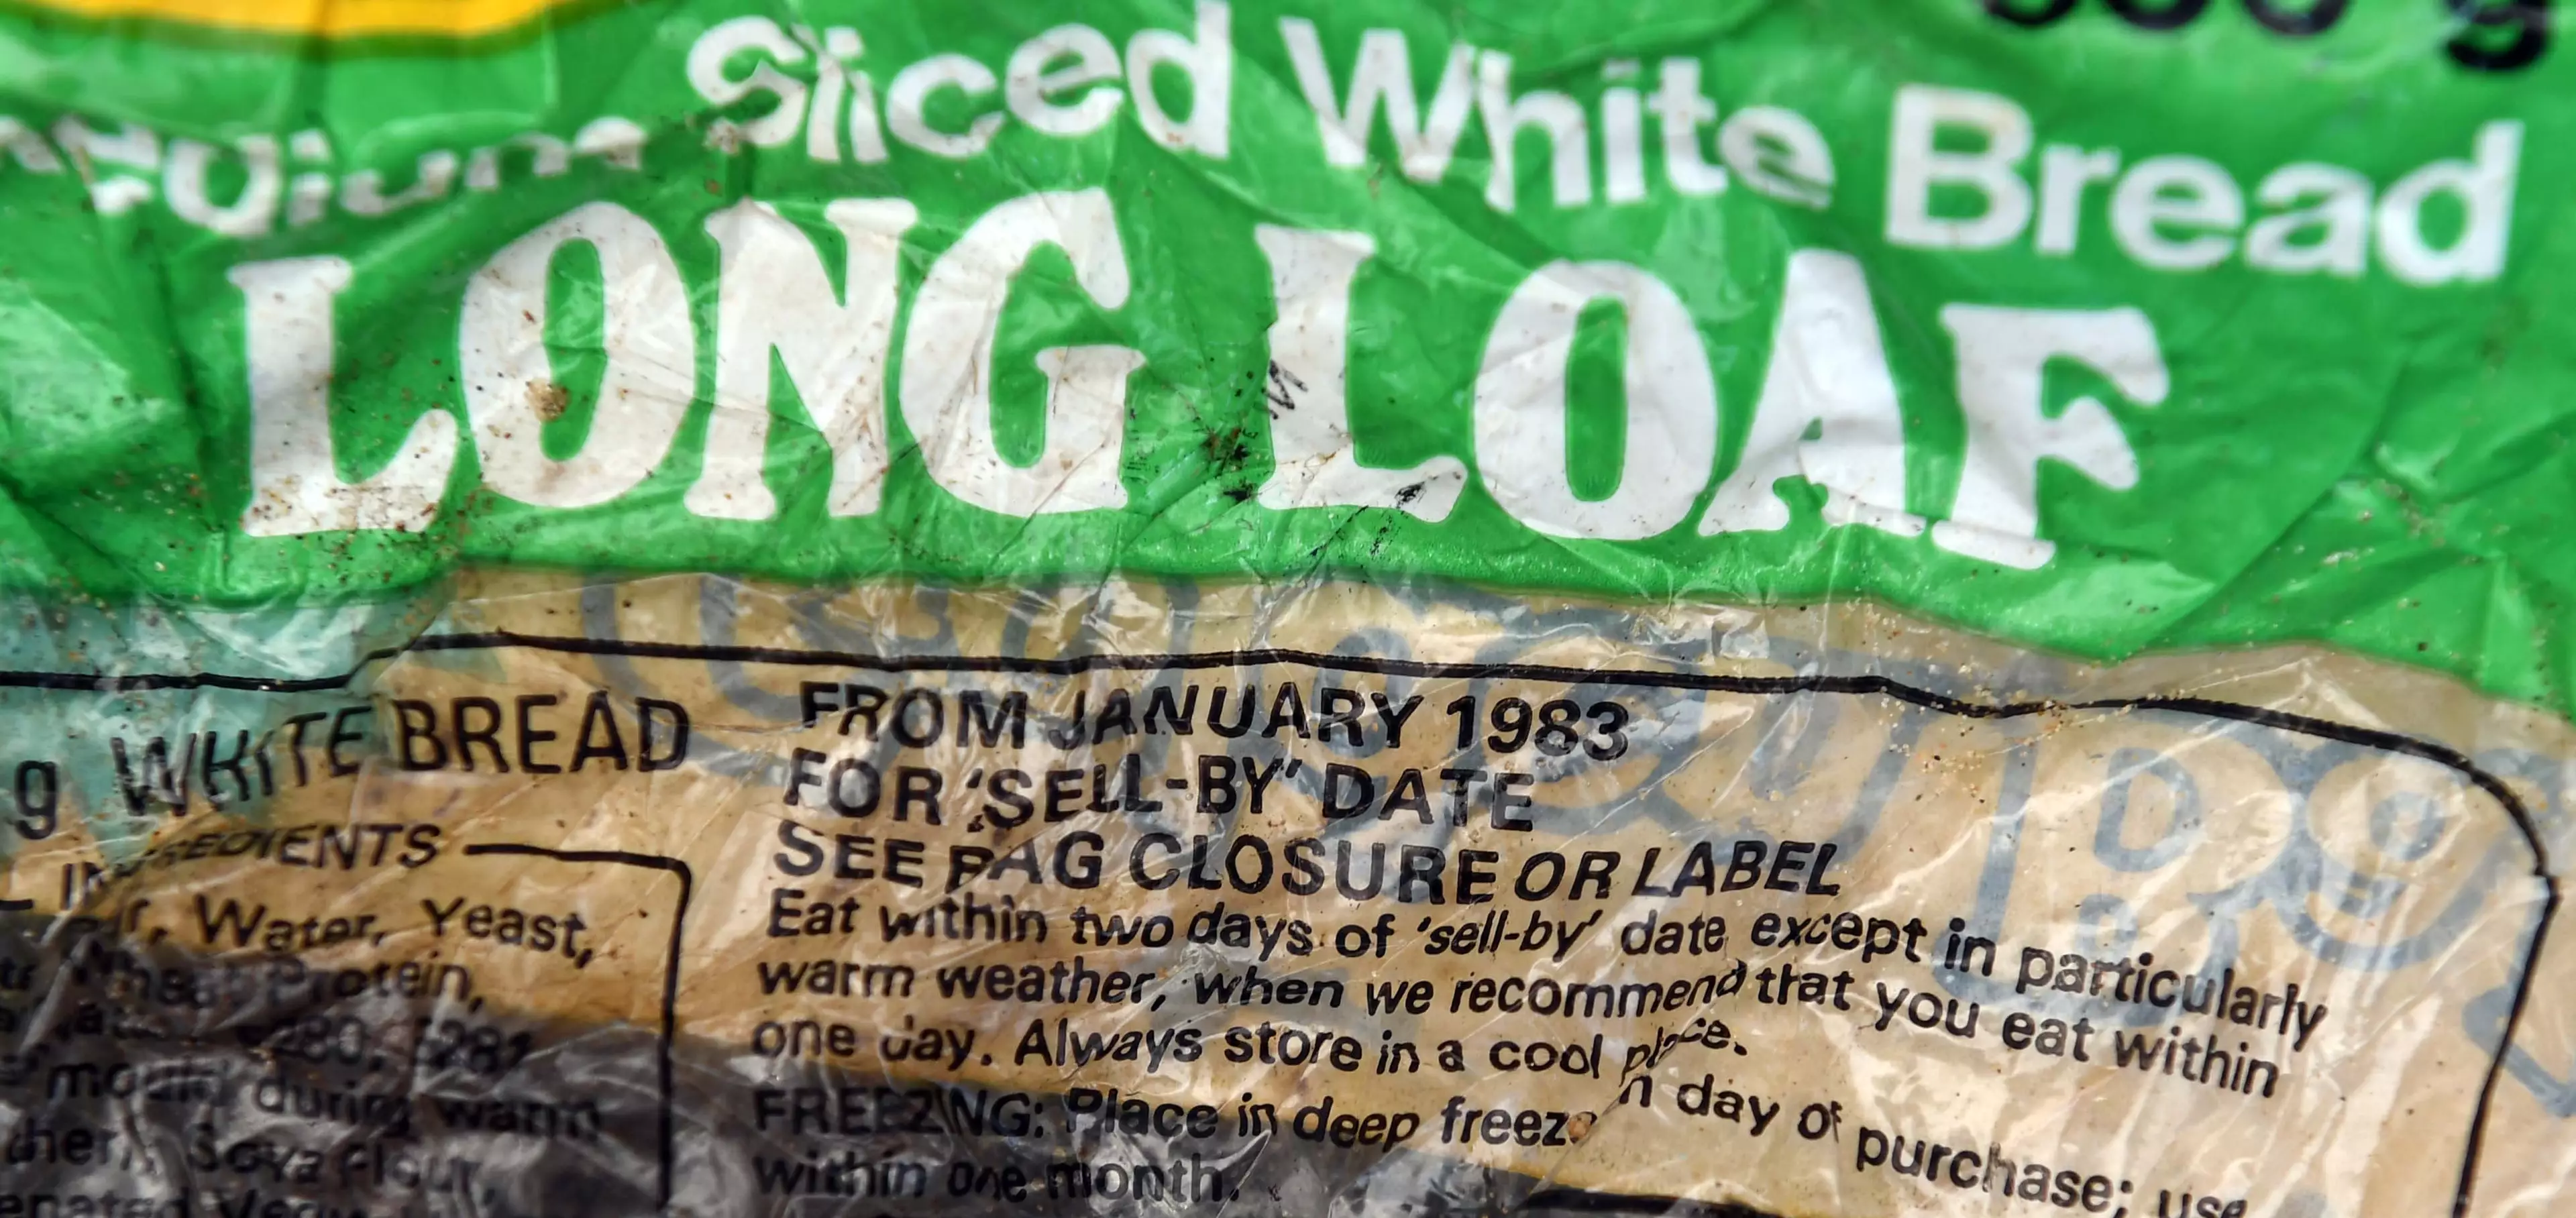 The loaf of bread dated 1983.